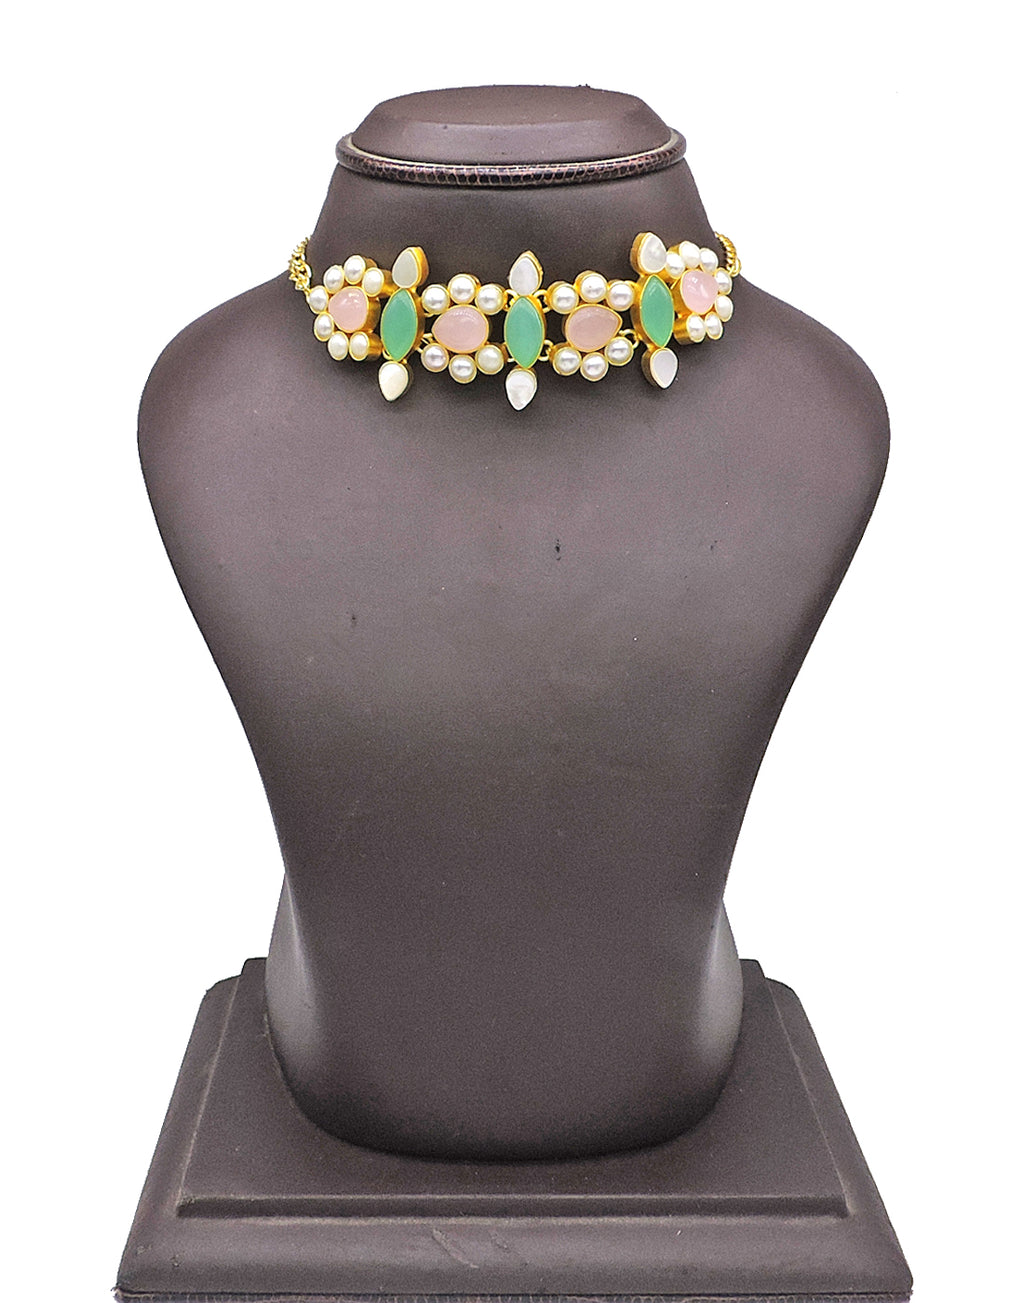 Flower Quad Necklace - Statement Necklaces - Gold-Plated & Hypoallergenic Jewellery - Made in India - Dubai Jewellery - Dori